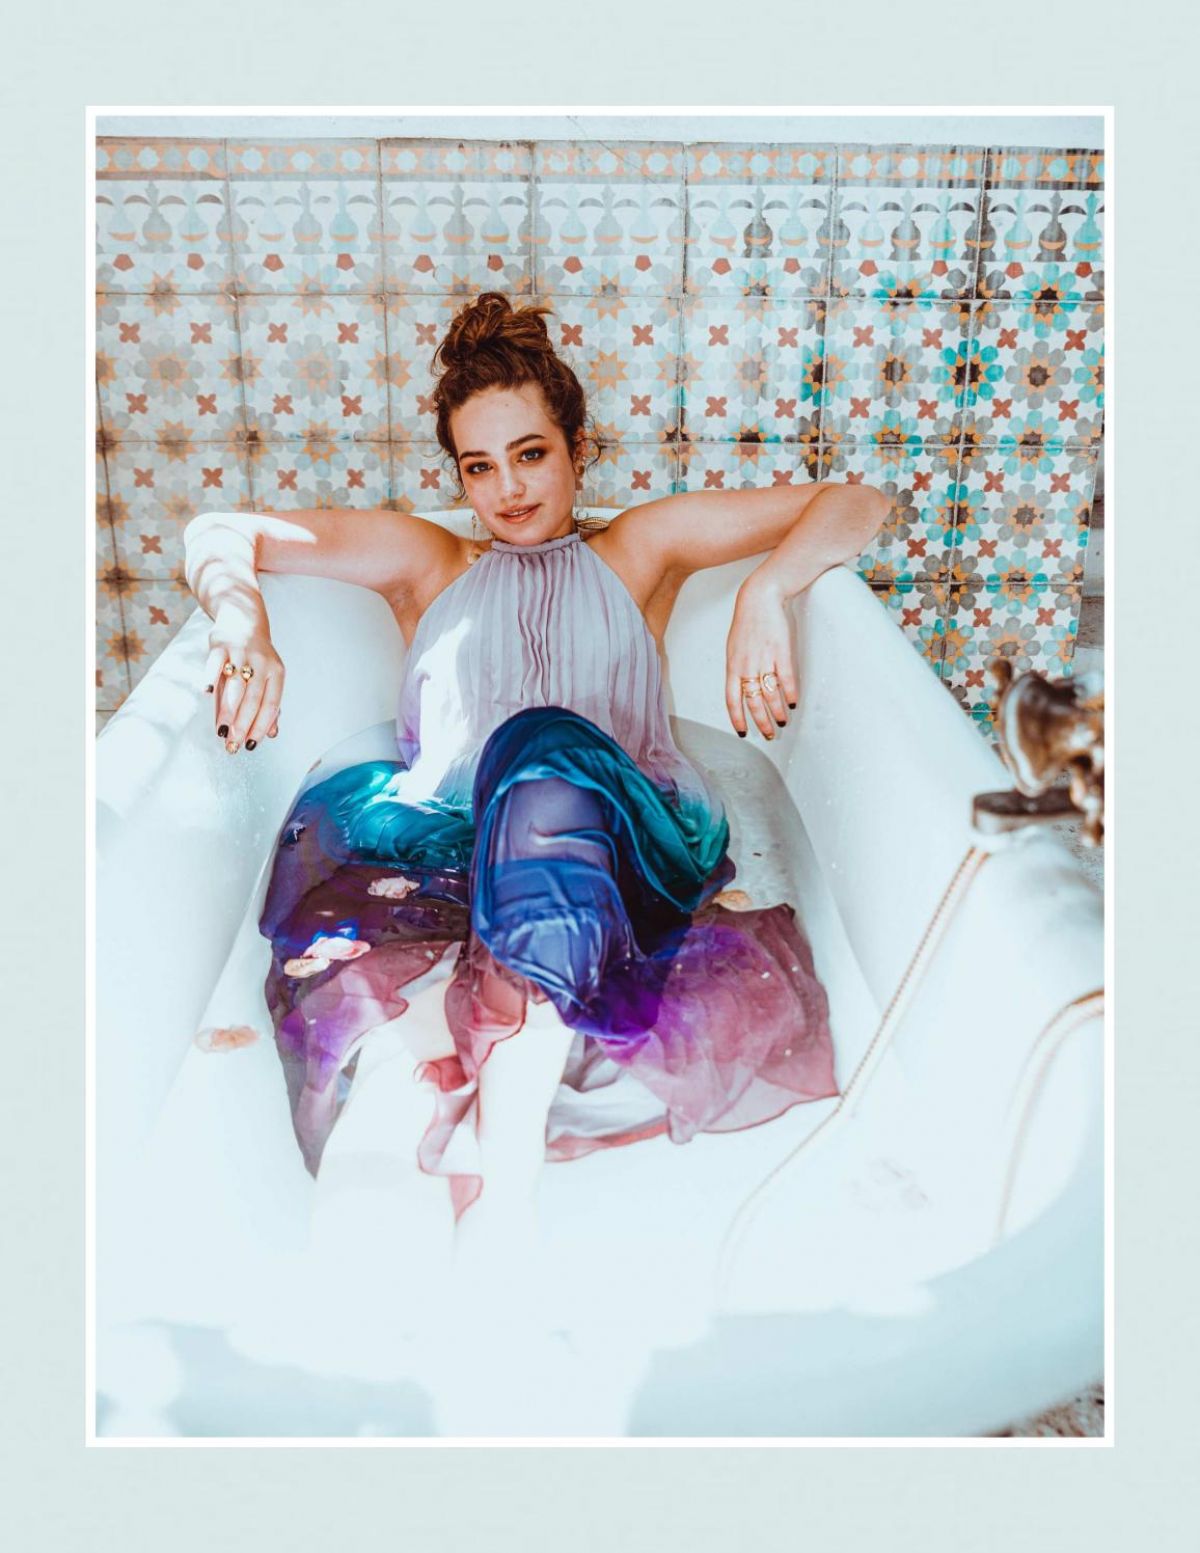 MARY MOUSER for Saturne Magazine, Summer 2019.